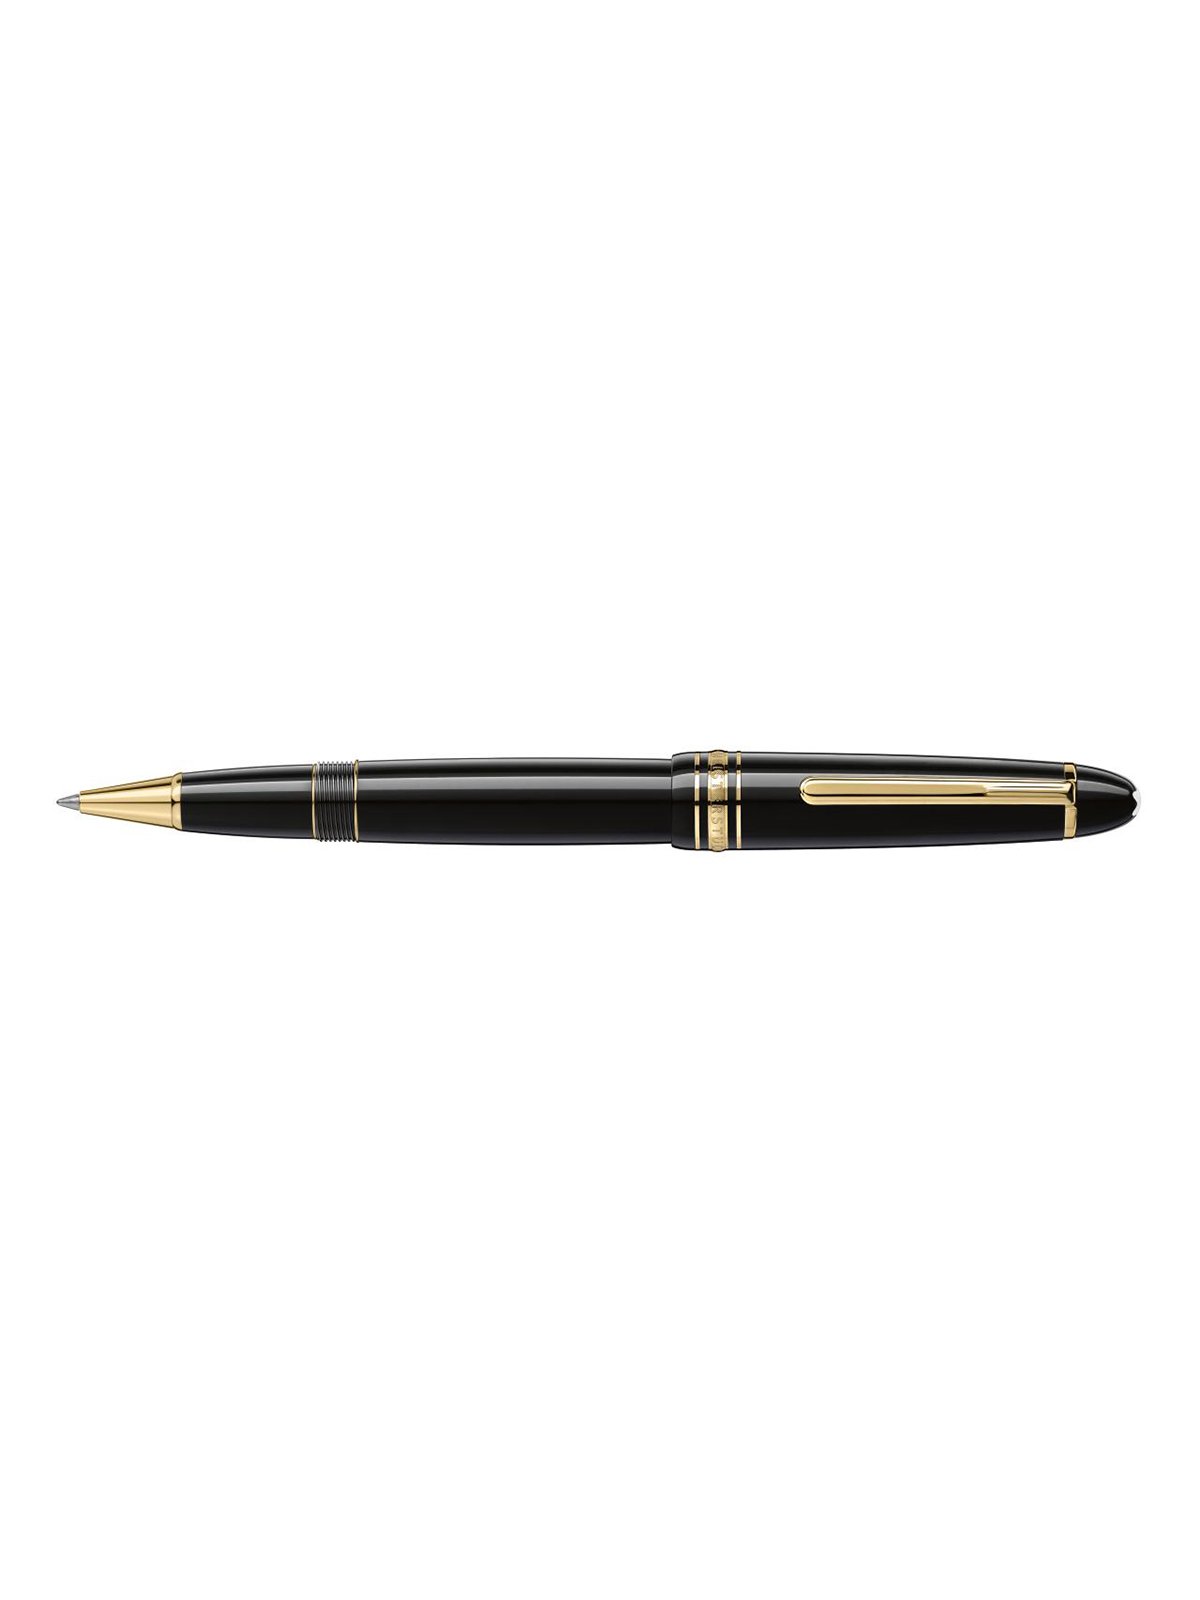 Montblanc Meisterstuck Gold-Coated LeGrand Rollerball Pen MB11402